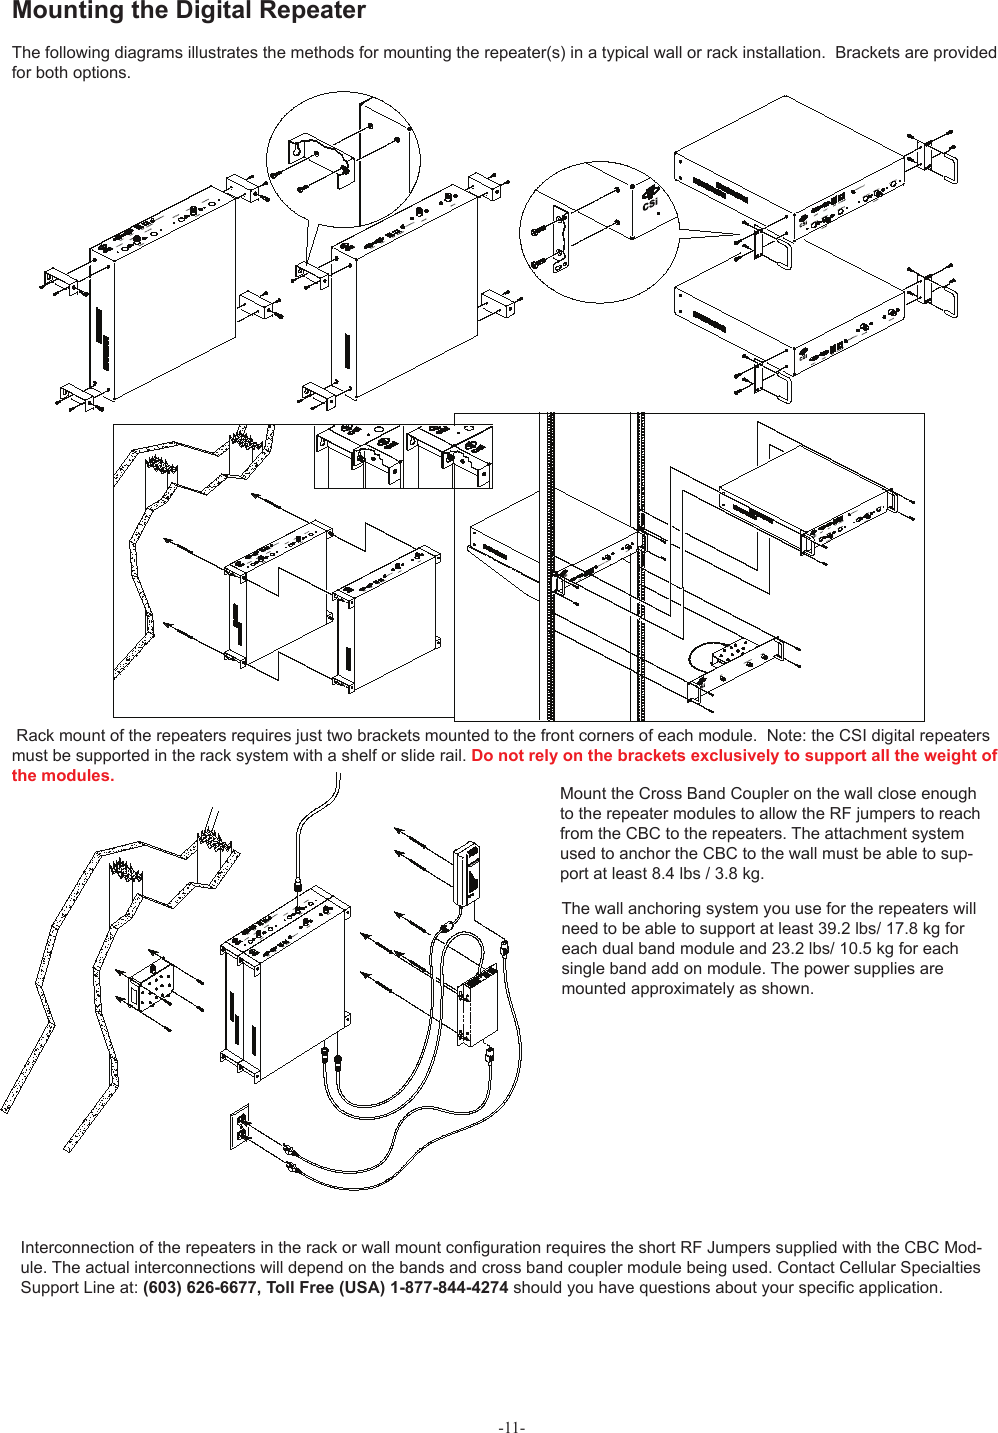 -11- Mounting the Digital RepeaterThe following diagrams illustrates the methods for mounting the repeater(s) in a typical wall or rack installation.  Brackets are provided for both options. Rack mount of the repeaters requires just two brackets mounted to the front corners of each module.  Note: the CSI digital repeaters must be supported in the rack system with a shelf or slide rail. Do not rely on the brackets exclusively to support all the weight of the modules.Mount the Cross Band Coupler on the wall close enough to the repeater modules to allow the RF jumpers to reach from the CBC to the repeaters. The attachment system used to anchor the CBC to the wall must be able to sup-port at least 8.4 lbs / 3.8 kg. The wall anchoring system you use for the repeaters will need to be able to support at least 39.2 lbs/ 17.8 kg for each dual band module and 23.2 lbs/ 10.5 kg for each single band add on module. The power supplies are mounted approximately as shown.Interconnection of the repeaters in the rack or wall mount conﬁ guration requires the short RF Jumpers supplied with the CBC Mod-ule. The actual interconnections will depend on the bands and cross band coupler module being used. Contact Cellular Specialties Support Line at: (603) 626-6677, Toll Free (USA) 1-877-844-4274 should you have questions about your speciﬁ c application.